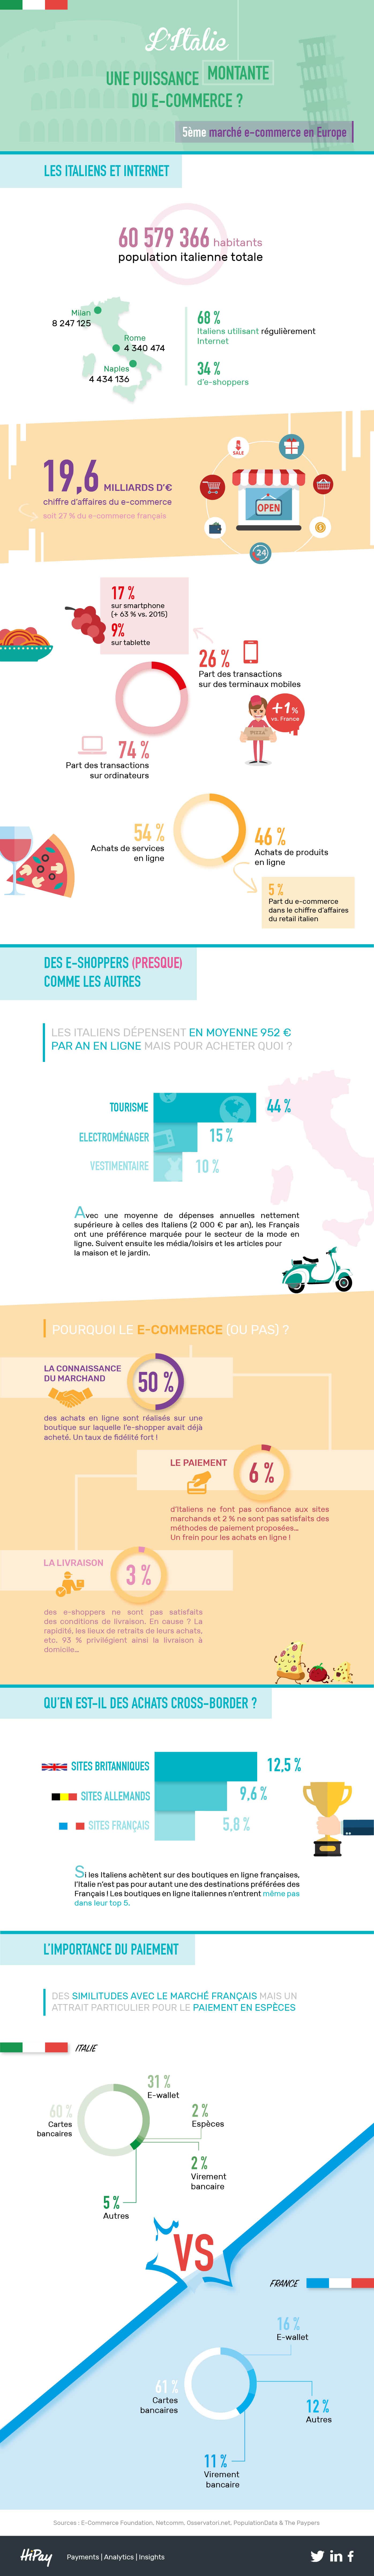 marche italie ecommerce